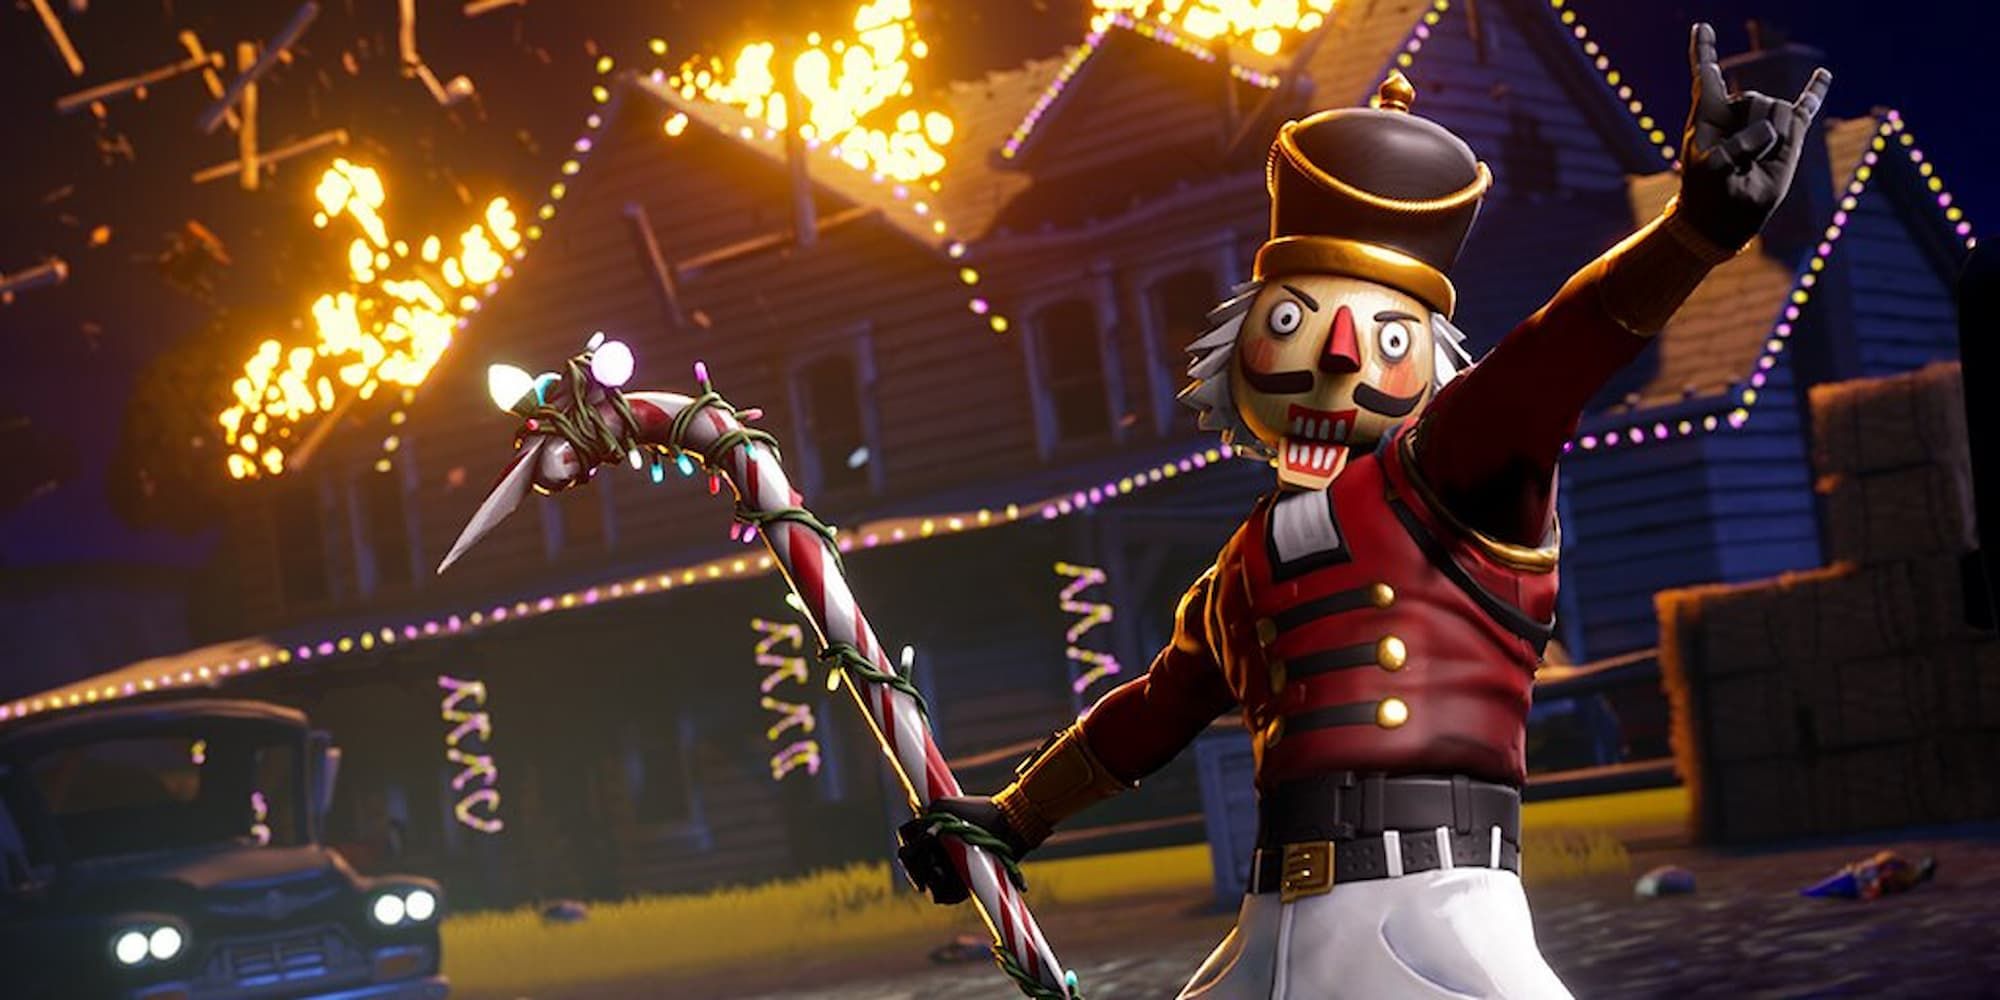 A nutcracker skin in Fortnite stands ready to swing its candy cane Harvesting Tool in the Pickaxe Frenzy Limited Time Mode.